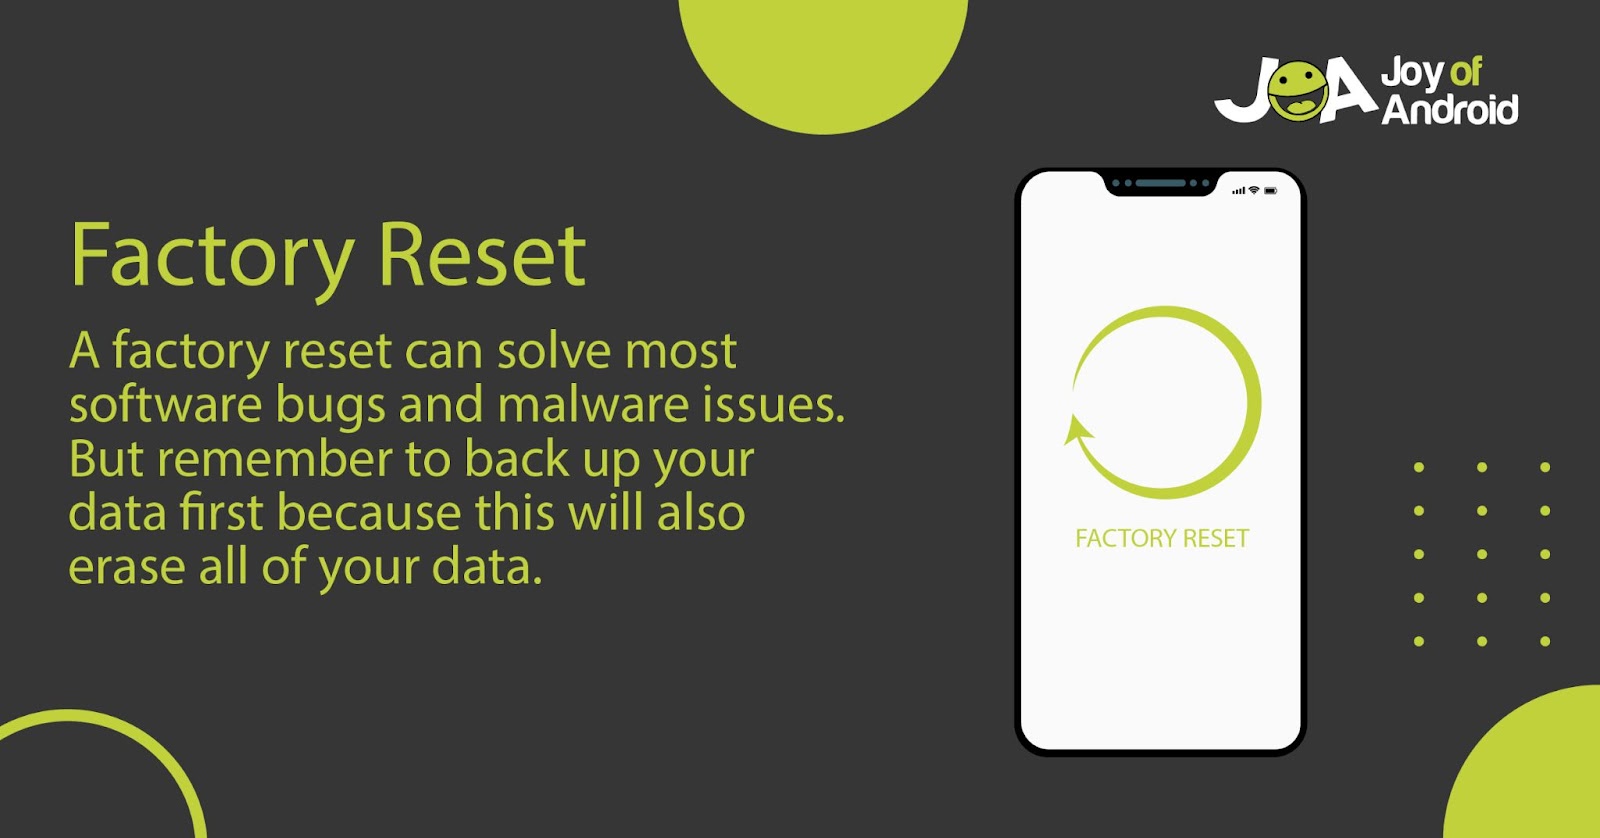 A factory reset can help solve software issues that can cause ghost touch